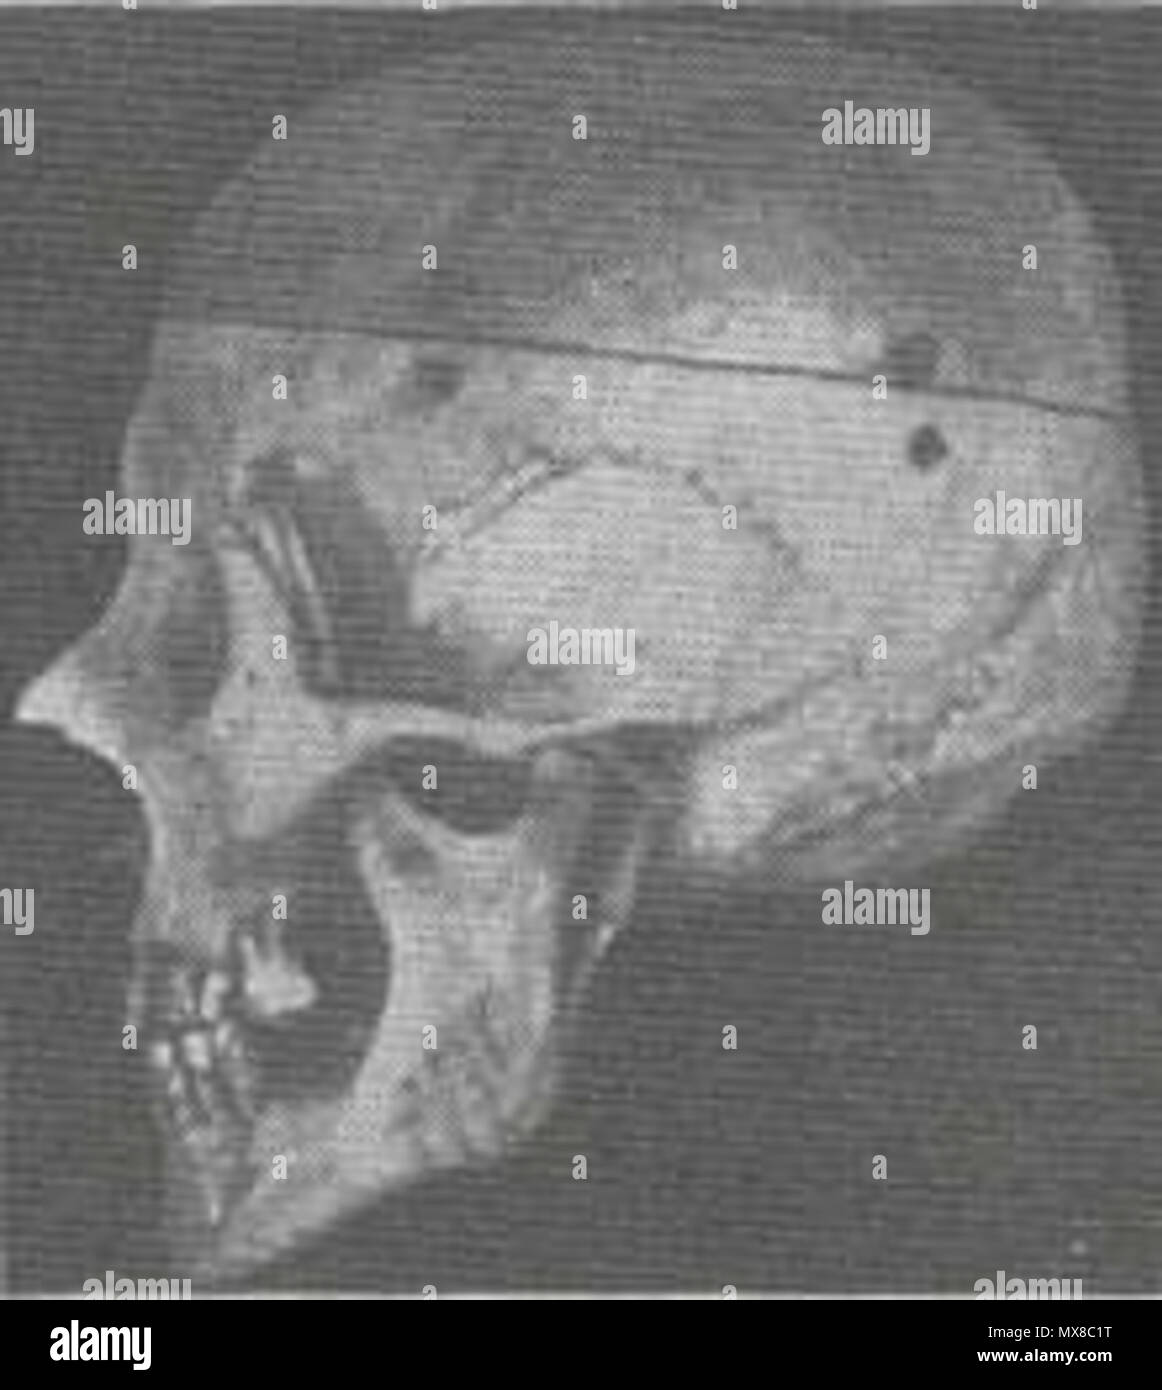 . English: Dinaric skull with especially marked Dinaric nose, and especially steep back to the head. 1927. Hans F.K. Gunther and the German Federal Archives 164 Dinaric Skull type Stock Photo